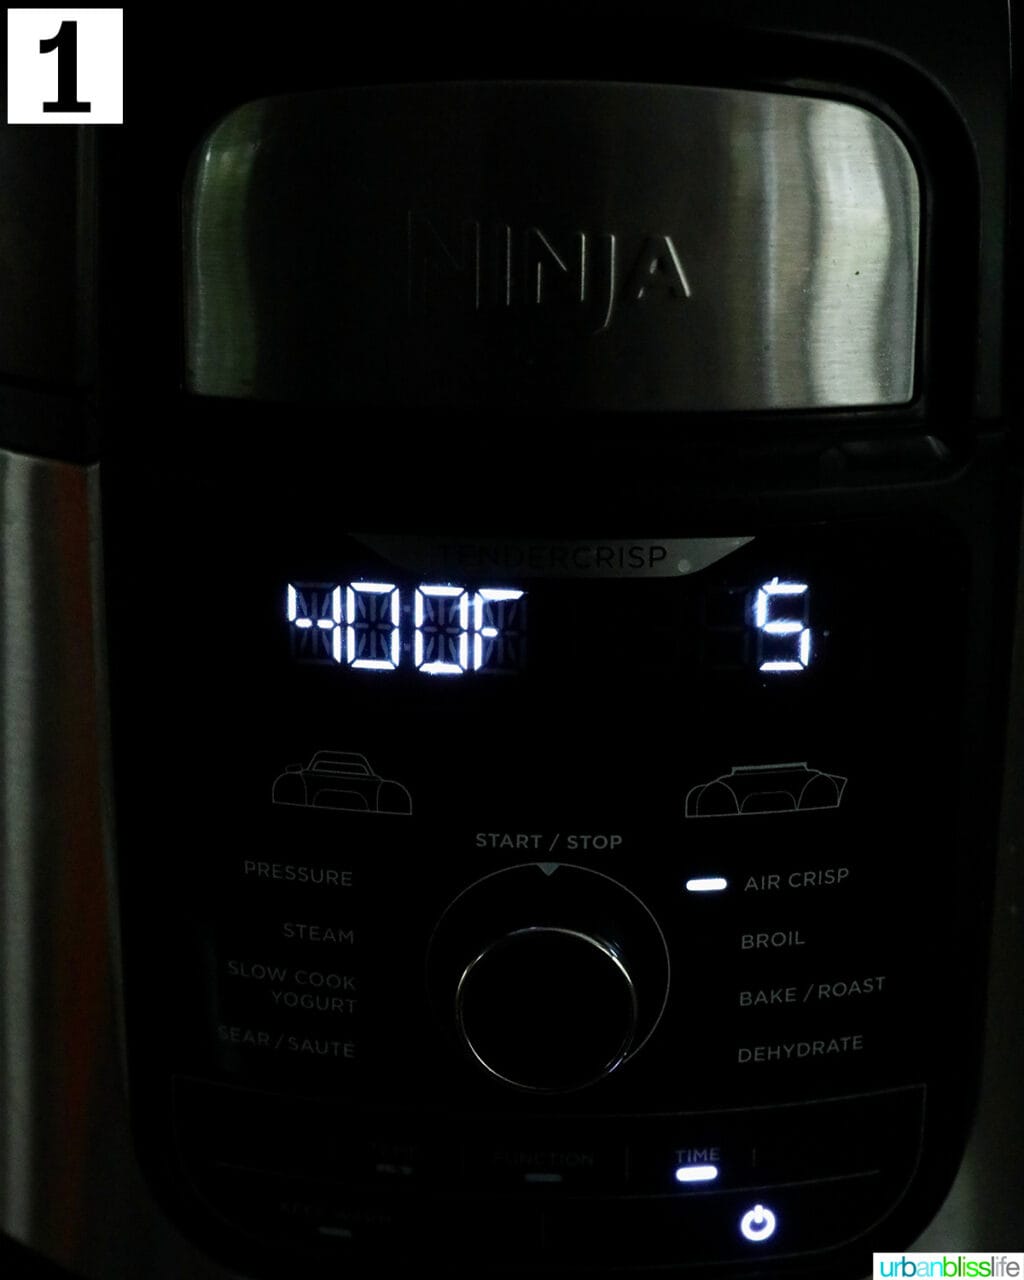 ninja air fryer set to 400 degrees for 5 minutes.